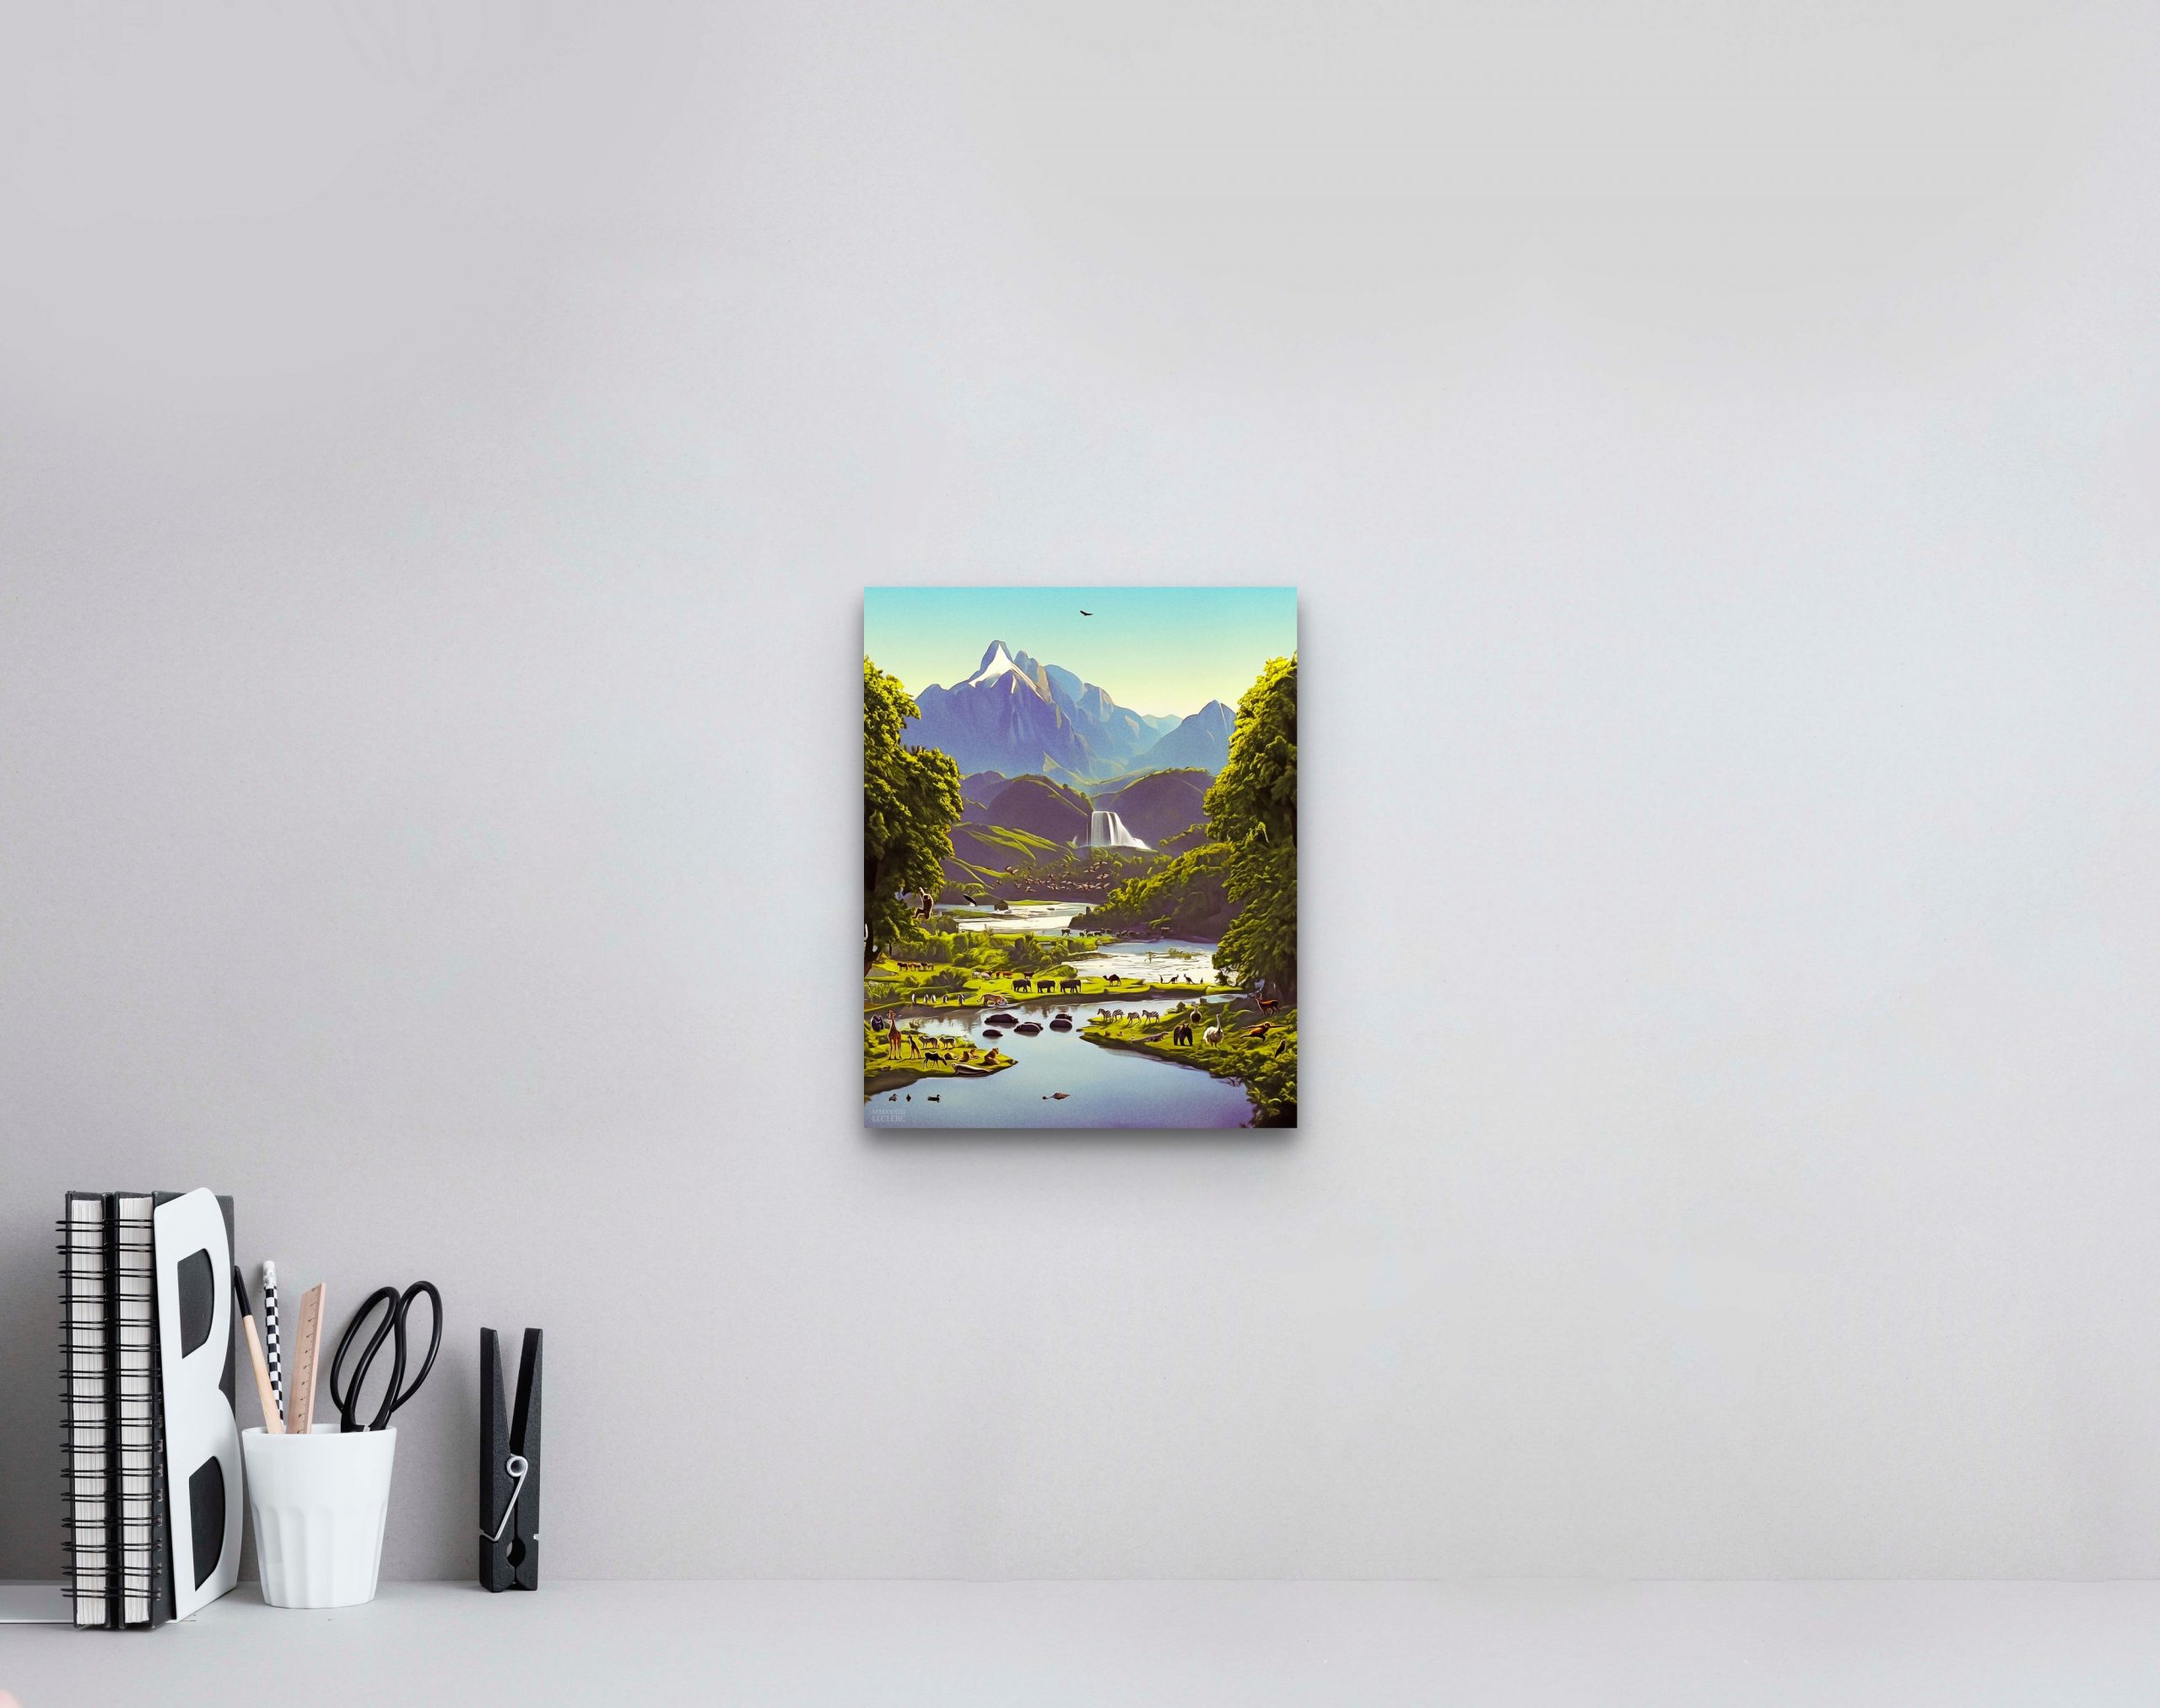 An artwork measuring 8 W x 10 H x 0.1 D inches displayed in a small interior setting. The colourful piece adds a touch of creativity and vibrancy to the interior, enhancing the overall aesthetic appeal.